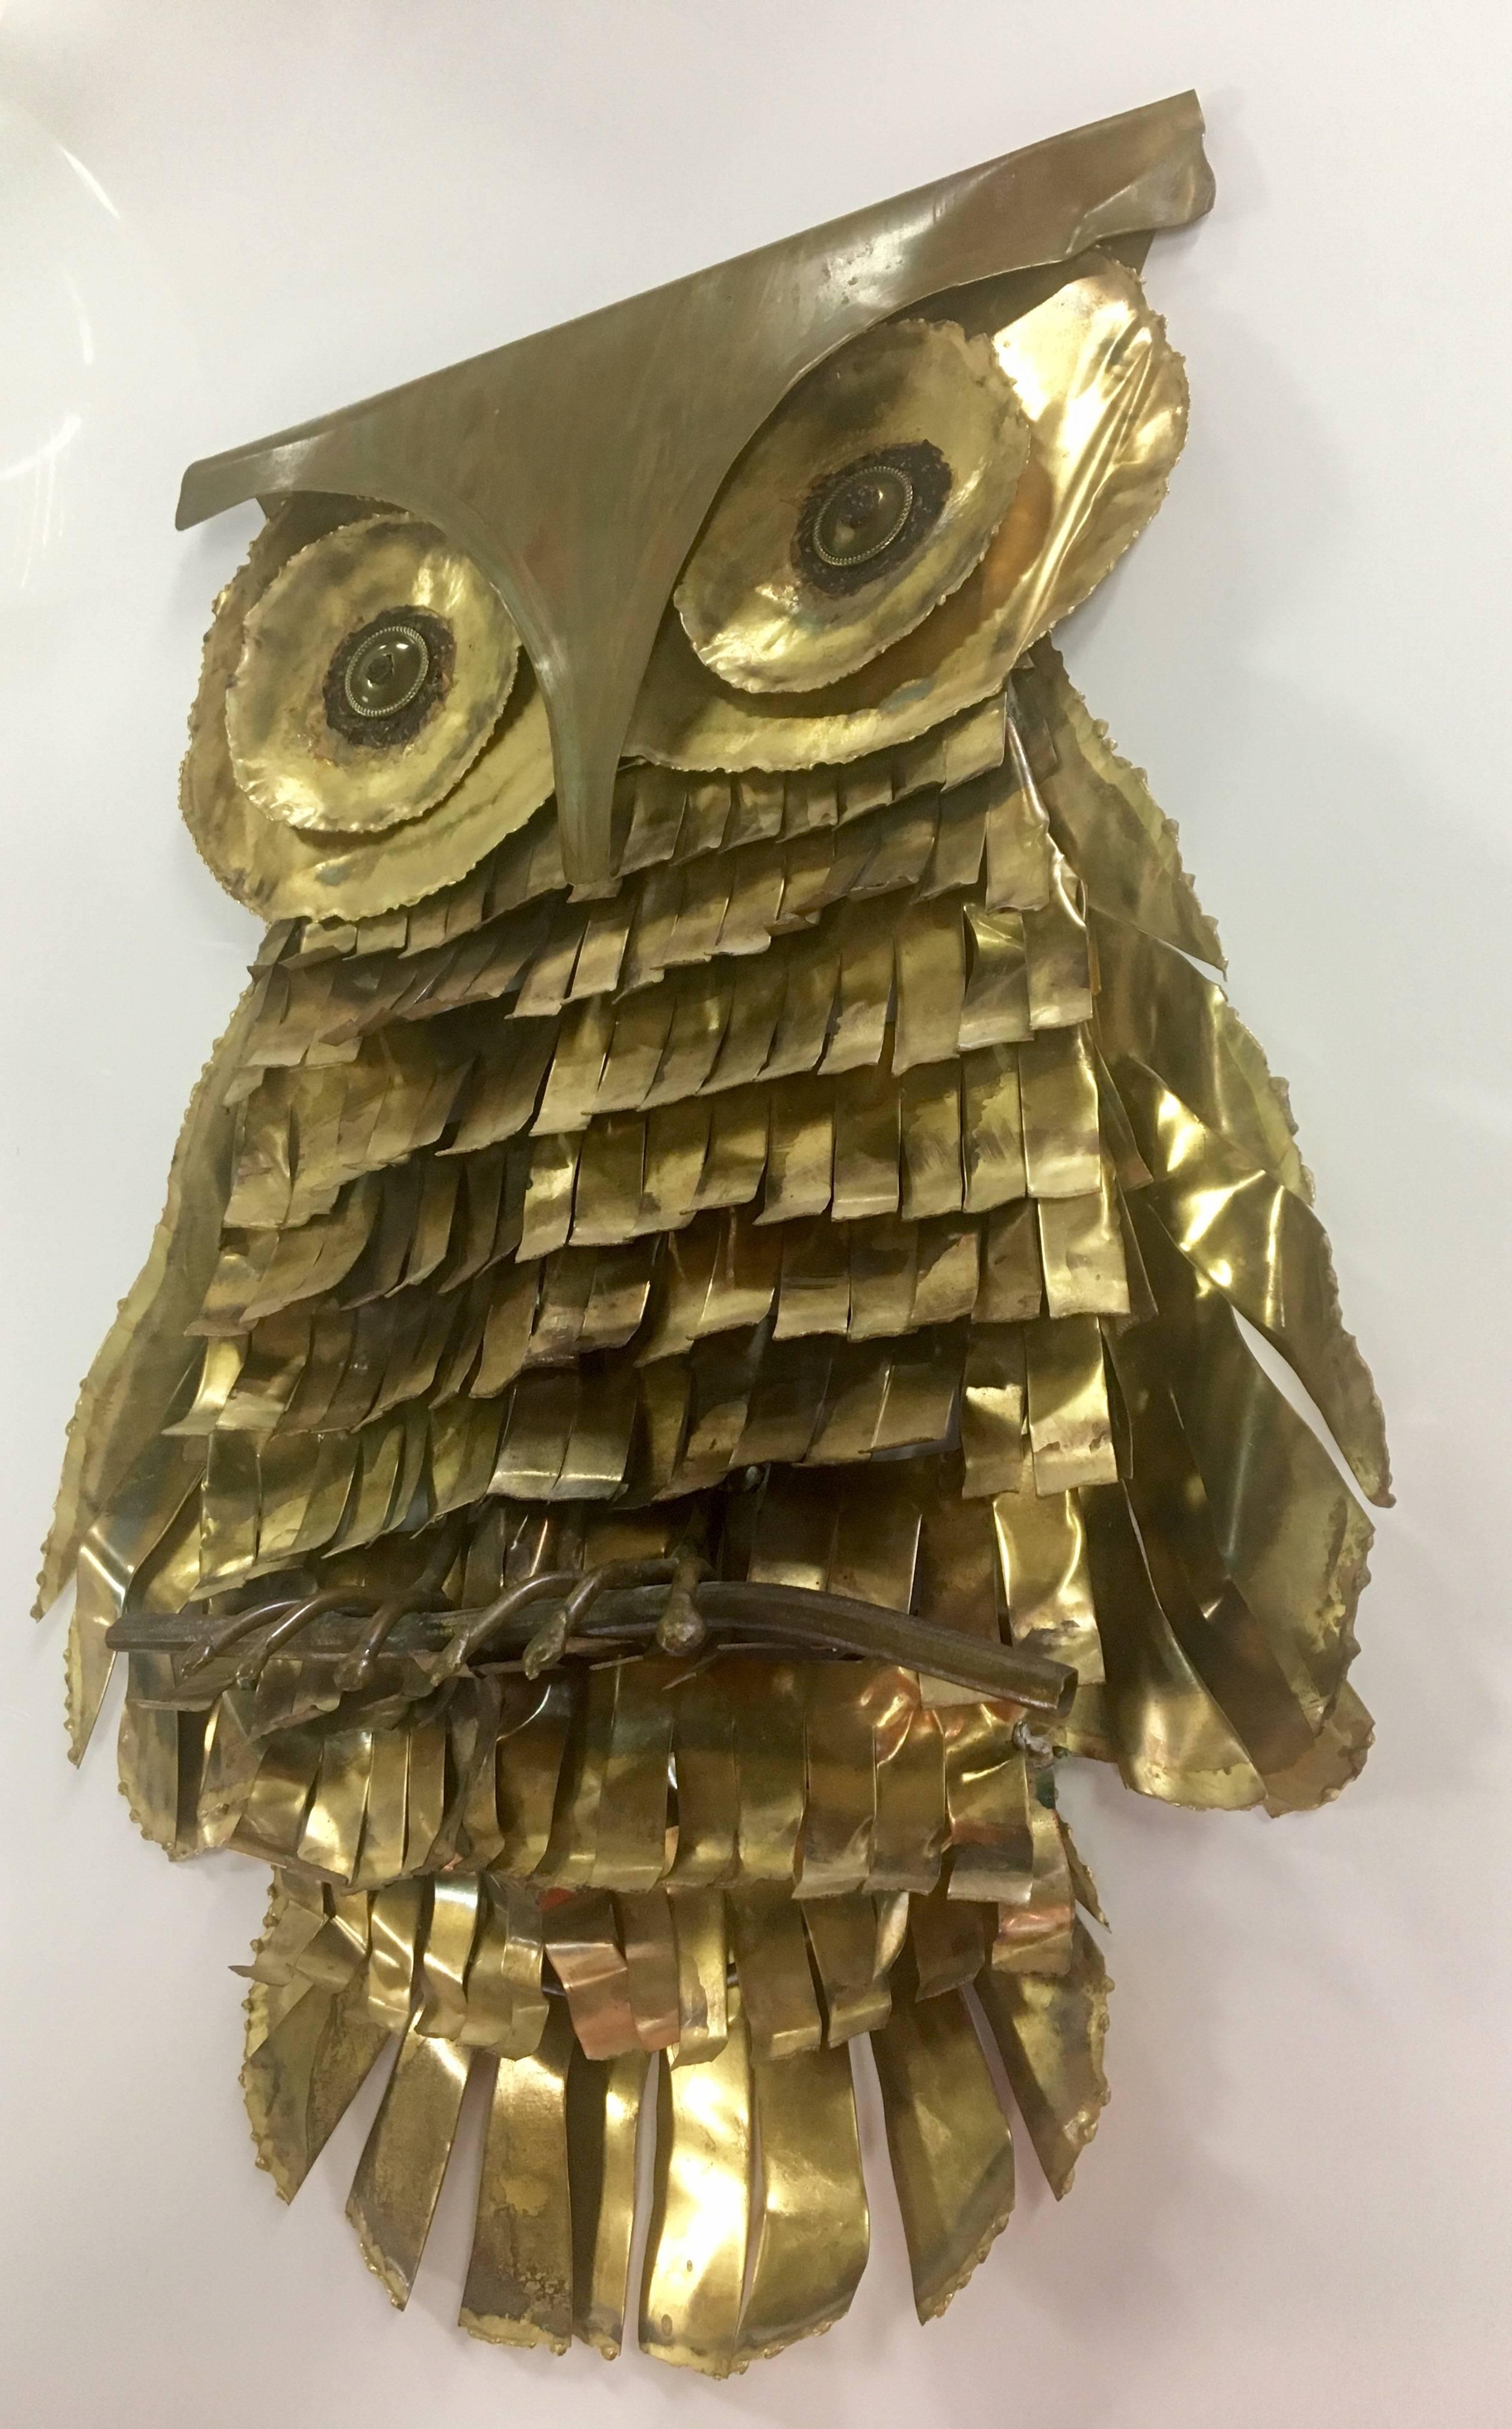 Hollywood Regency Whimsical Large Brass Owl Wall Sculpture Attributed to C. Jere